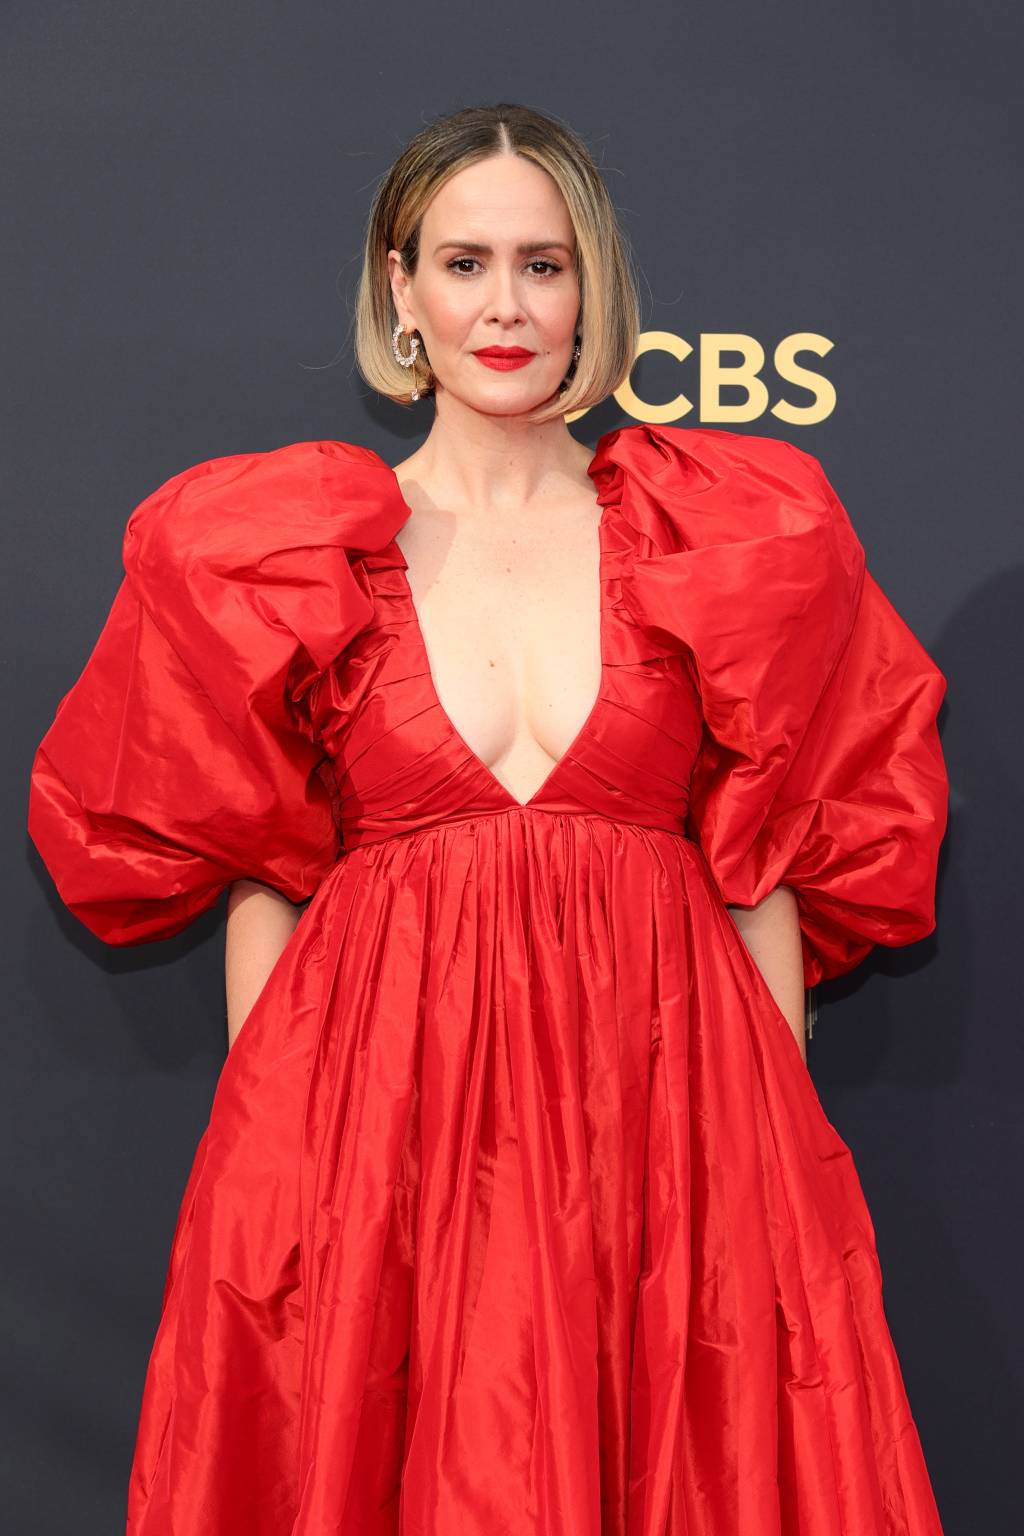 LOS ANGELES, CALIFORNIA - SEPTEMBER 19: Sarah Paulson attends the 73rd Primetime Emmy Awards at L.A. LIVE on September 19, 2021 in Los Angeles, California. (Photo by Rich Fury/Getty Images)